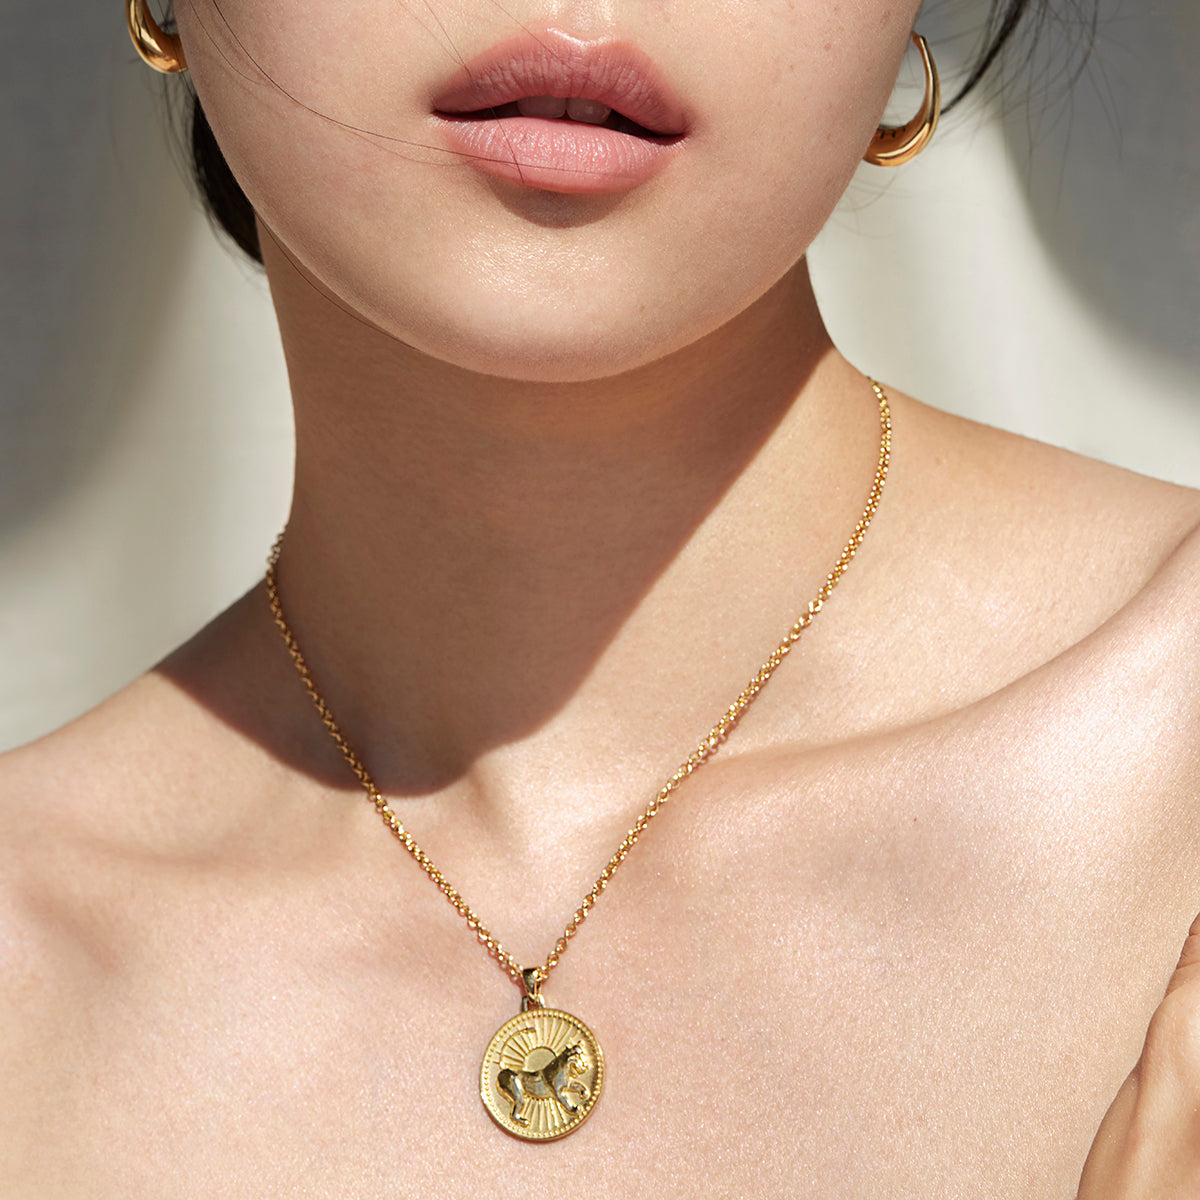 Woman from Lips to Shoulders Wearing Ethical Gold Leo Pendant Necklace